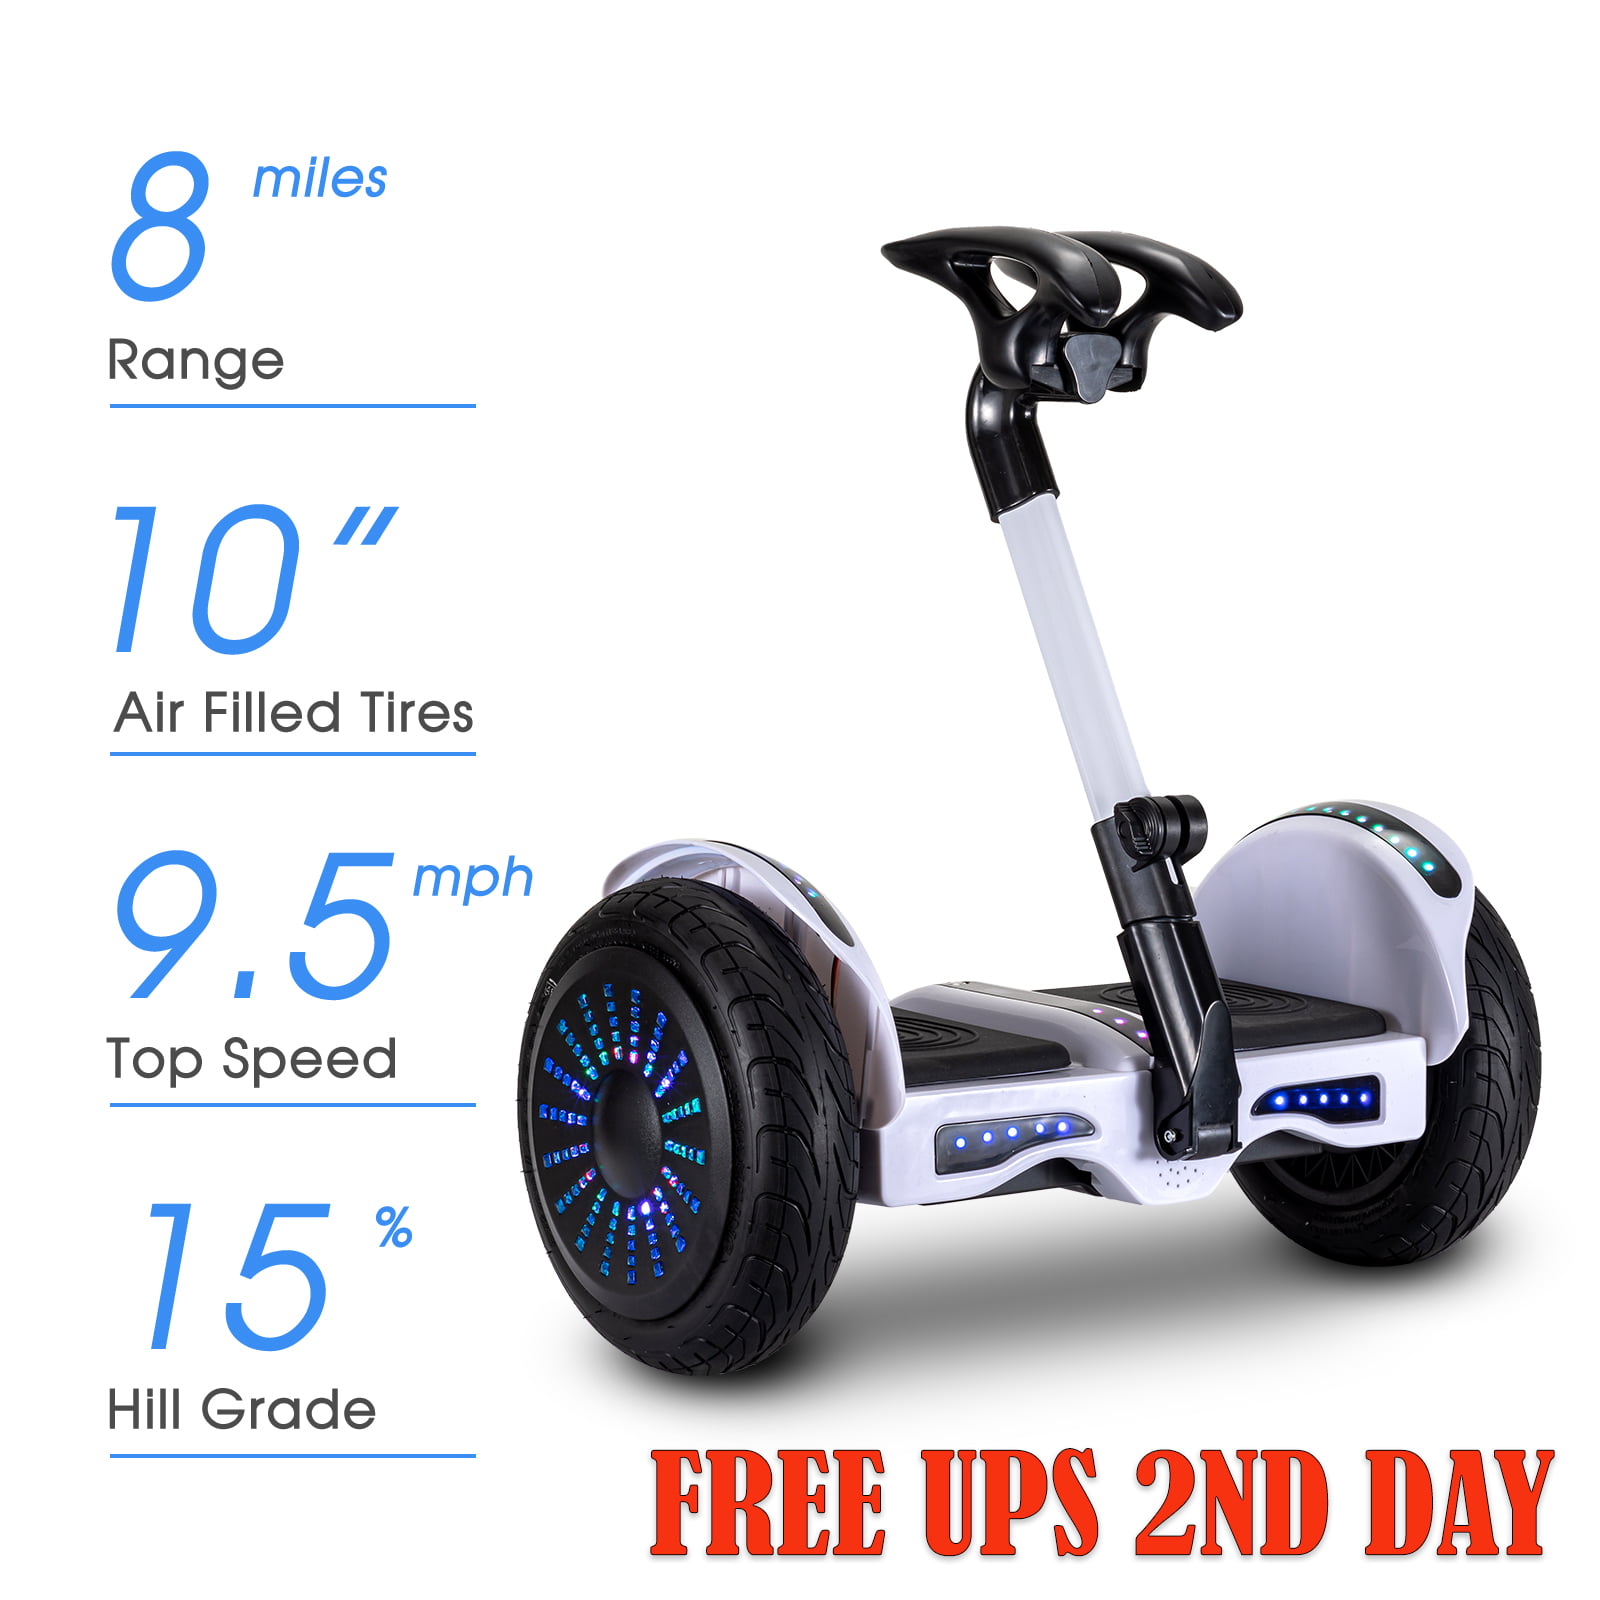 Dual Wheel Electrical Hoverboard Electrica Self Balance Scooter Leg Control 